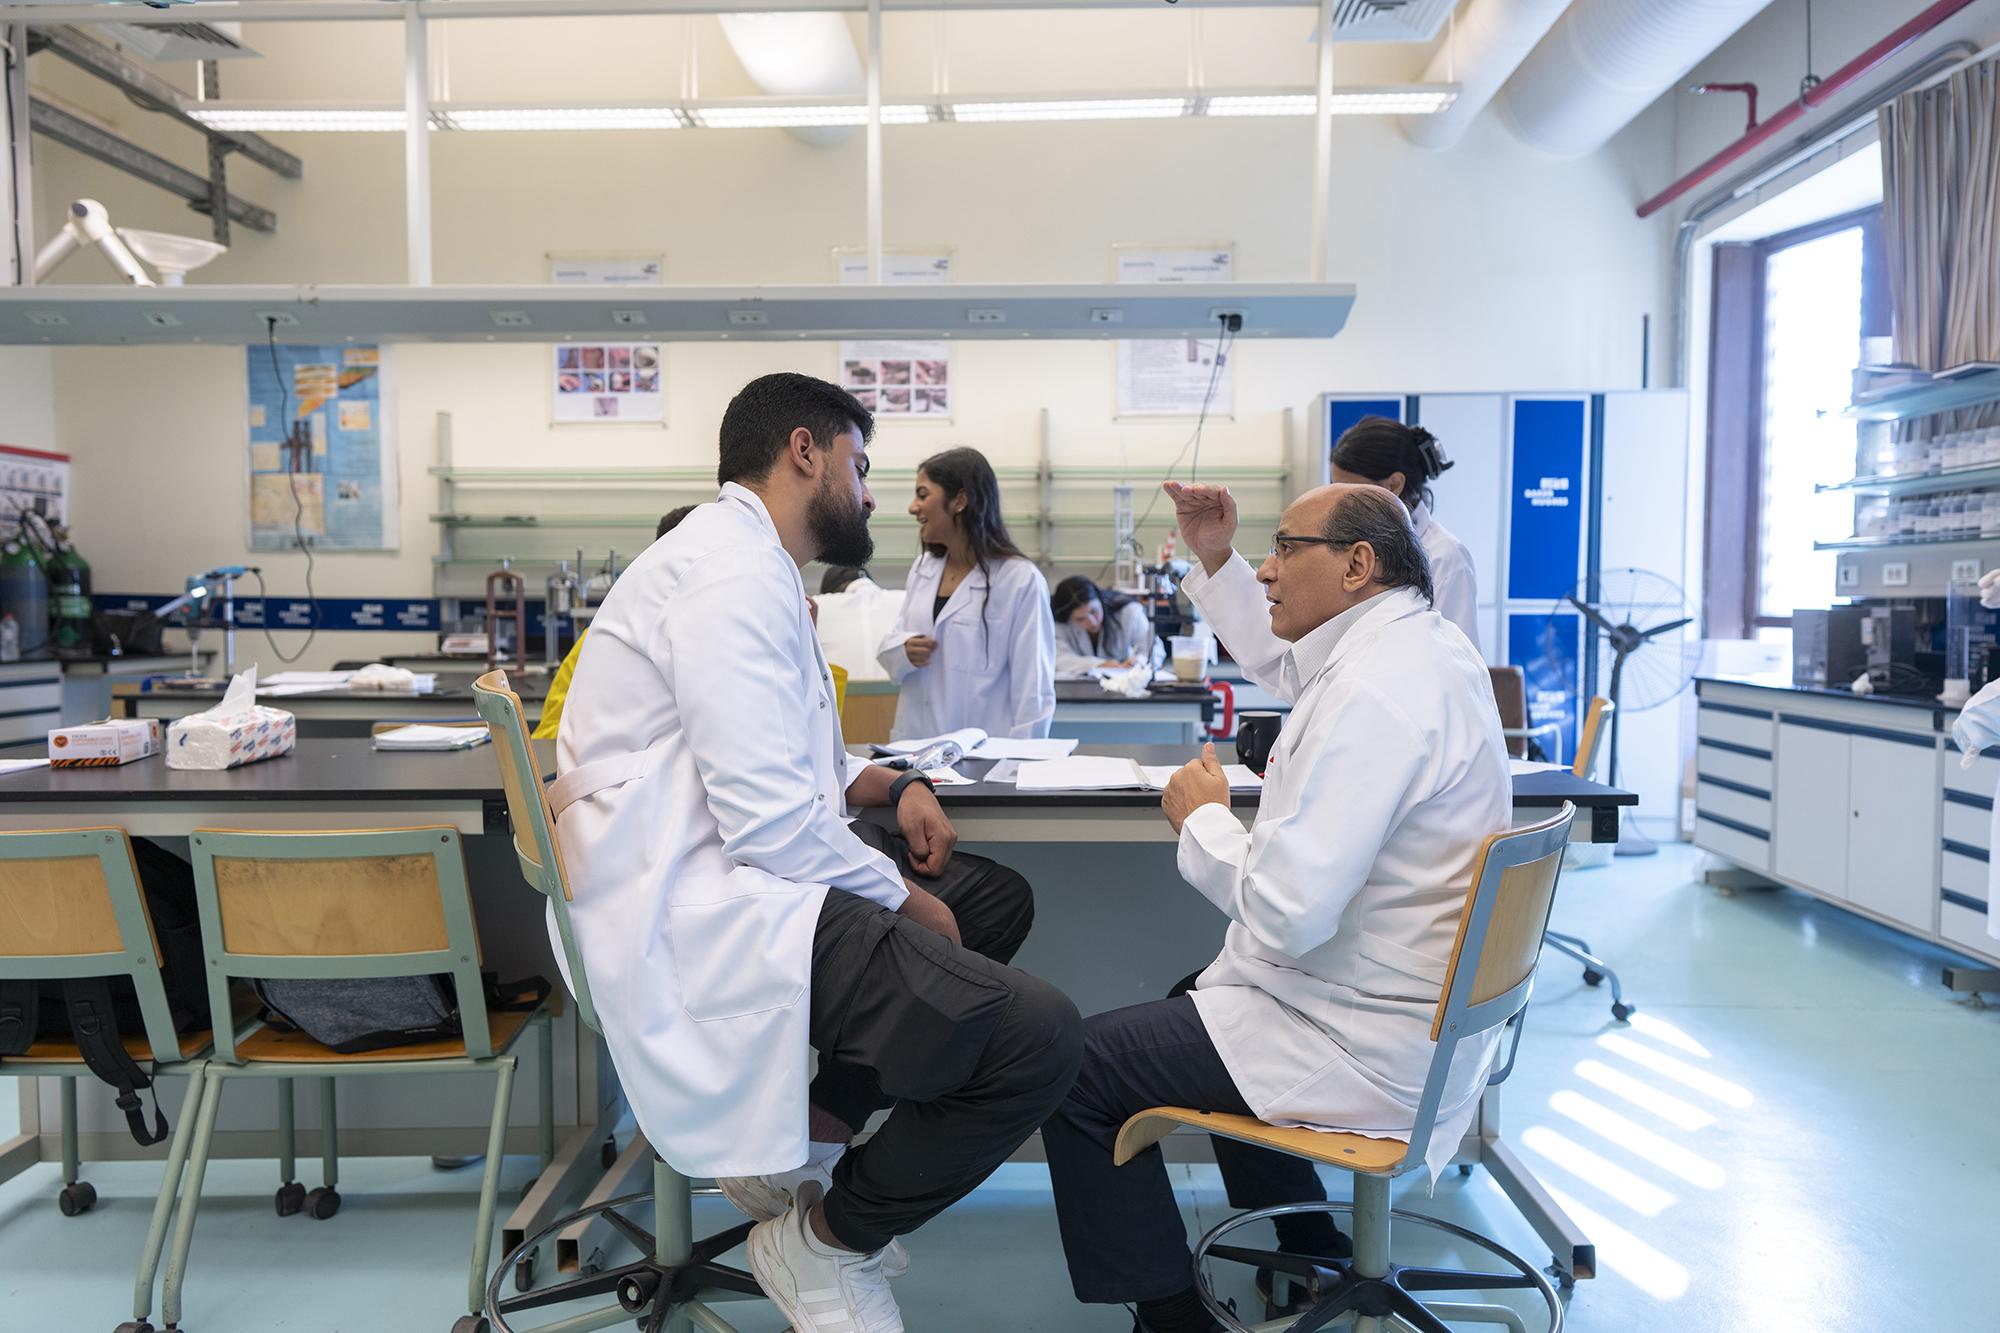 students working in lab wearing white coats